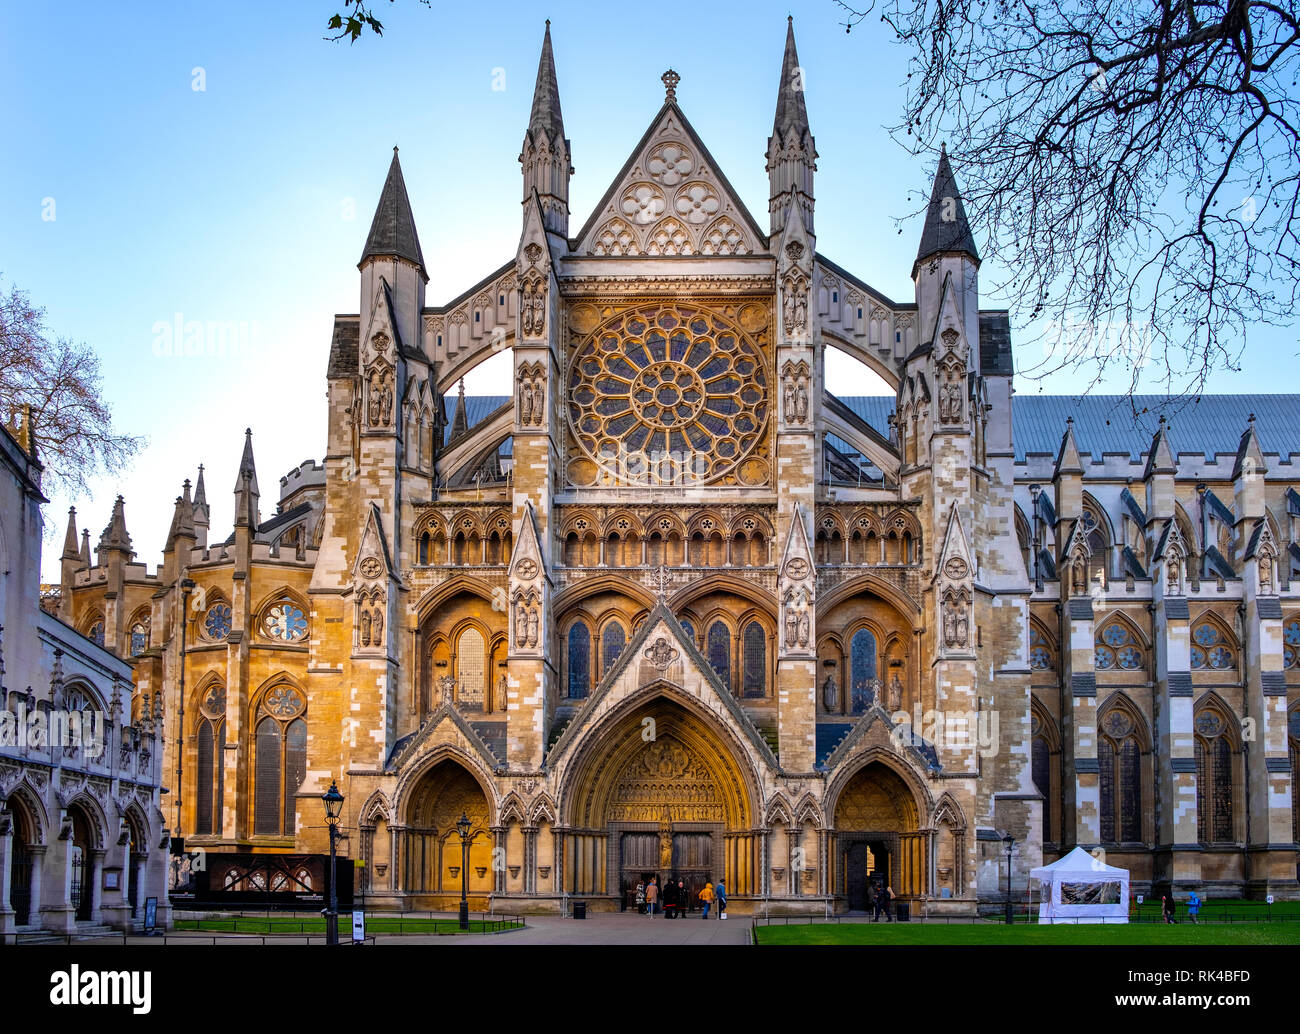 London, England / United Kingdom - 2019/01/28: Northern entrance to the royal Westminster Abbey, formally Collegiate Church of St. Peter at Westminste Stock Photo